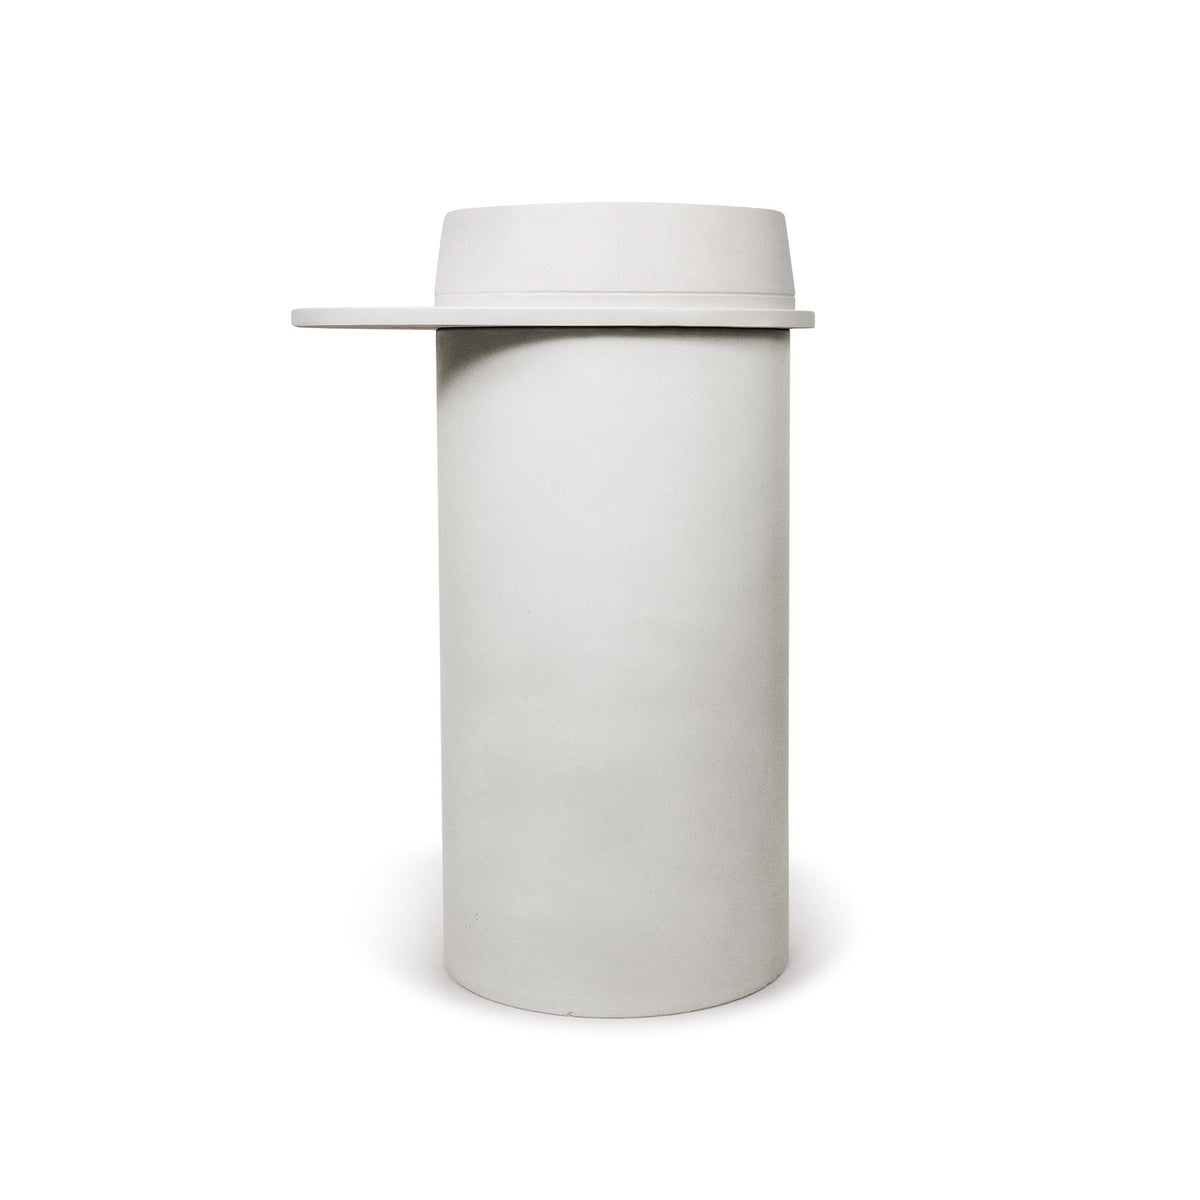 Cylinder with Tray - Funl Basin (Blush Pink,Charcoal)